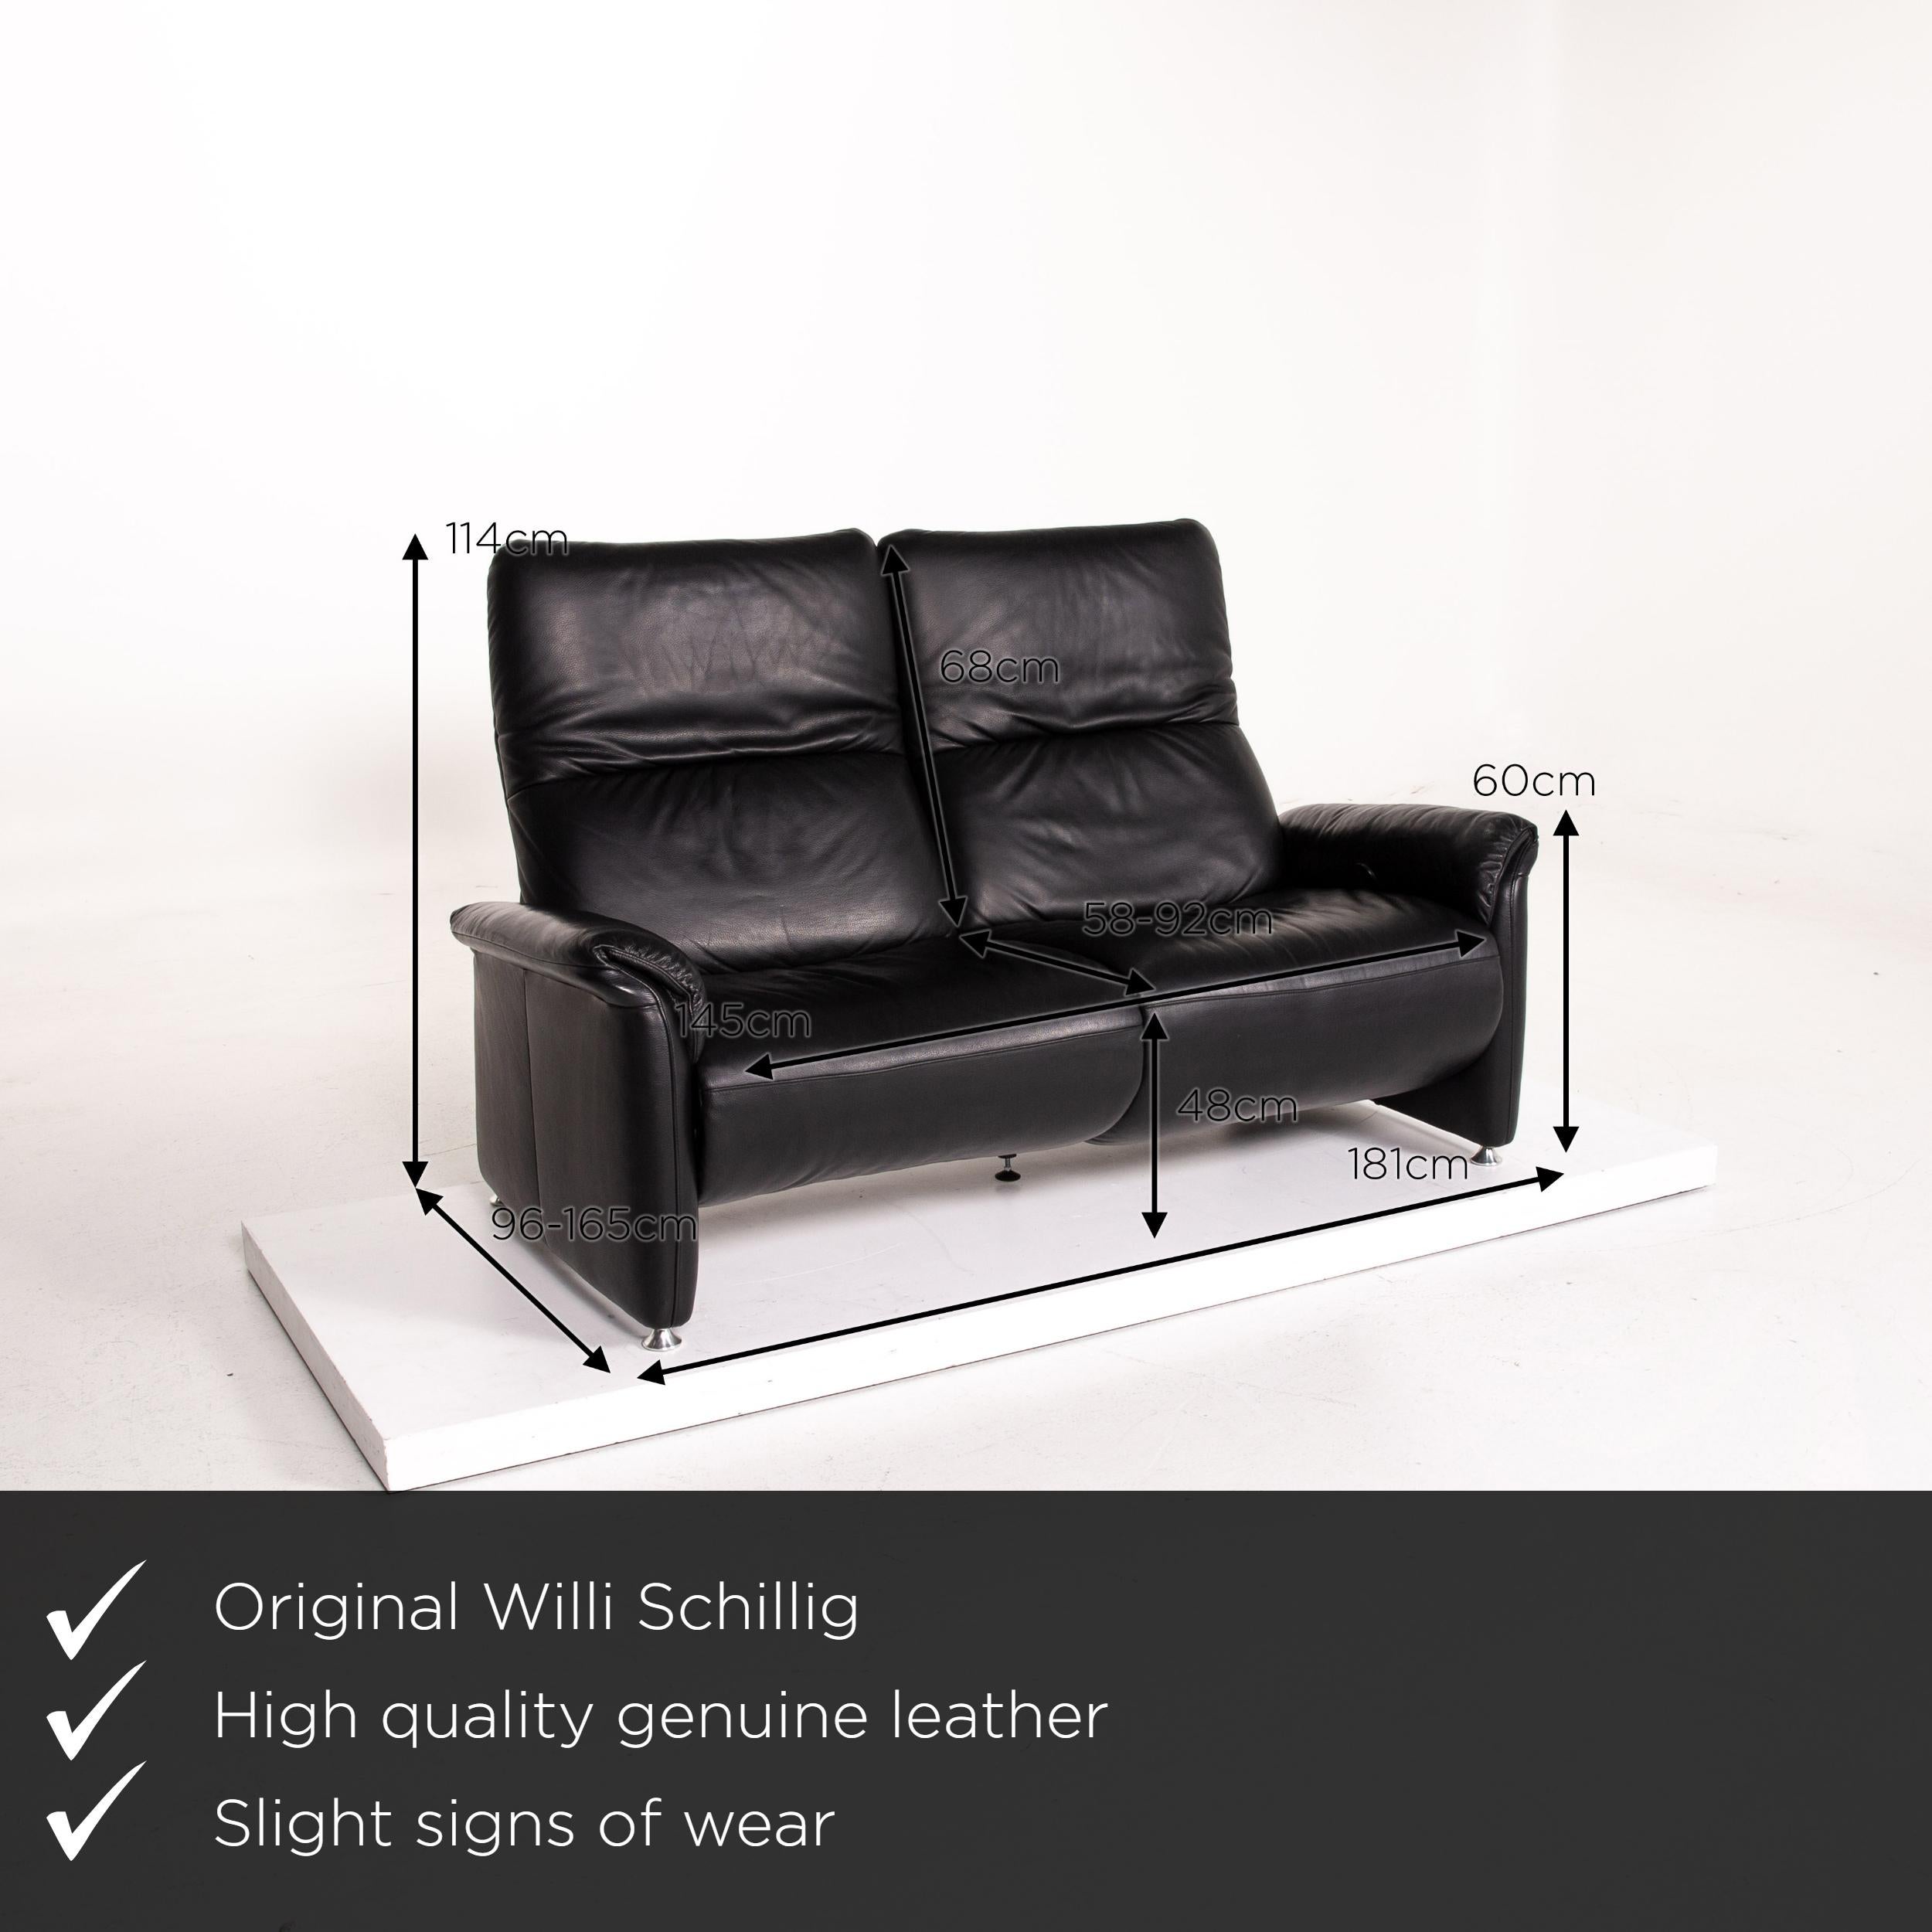 We present to you a Willi Schillig Ergoline leather sofa black two-seat function relax function.

Product measurements in centimeters:

Depth 96
Width 181
Height 114
Seat height 48
Rest height 60
Seat depth 58
Seat width 145
Back height